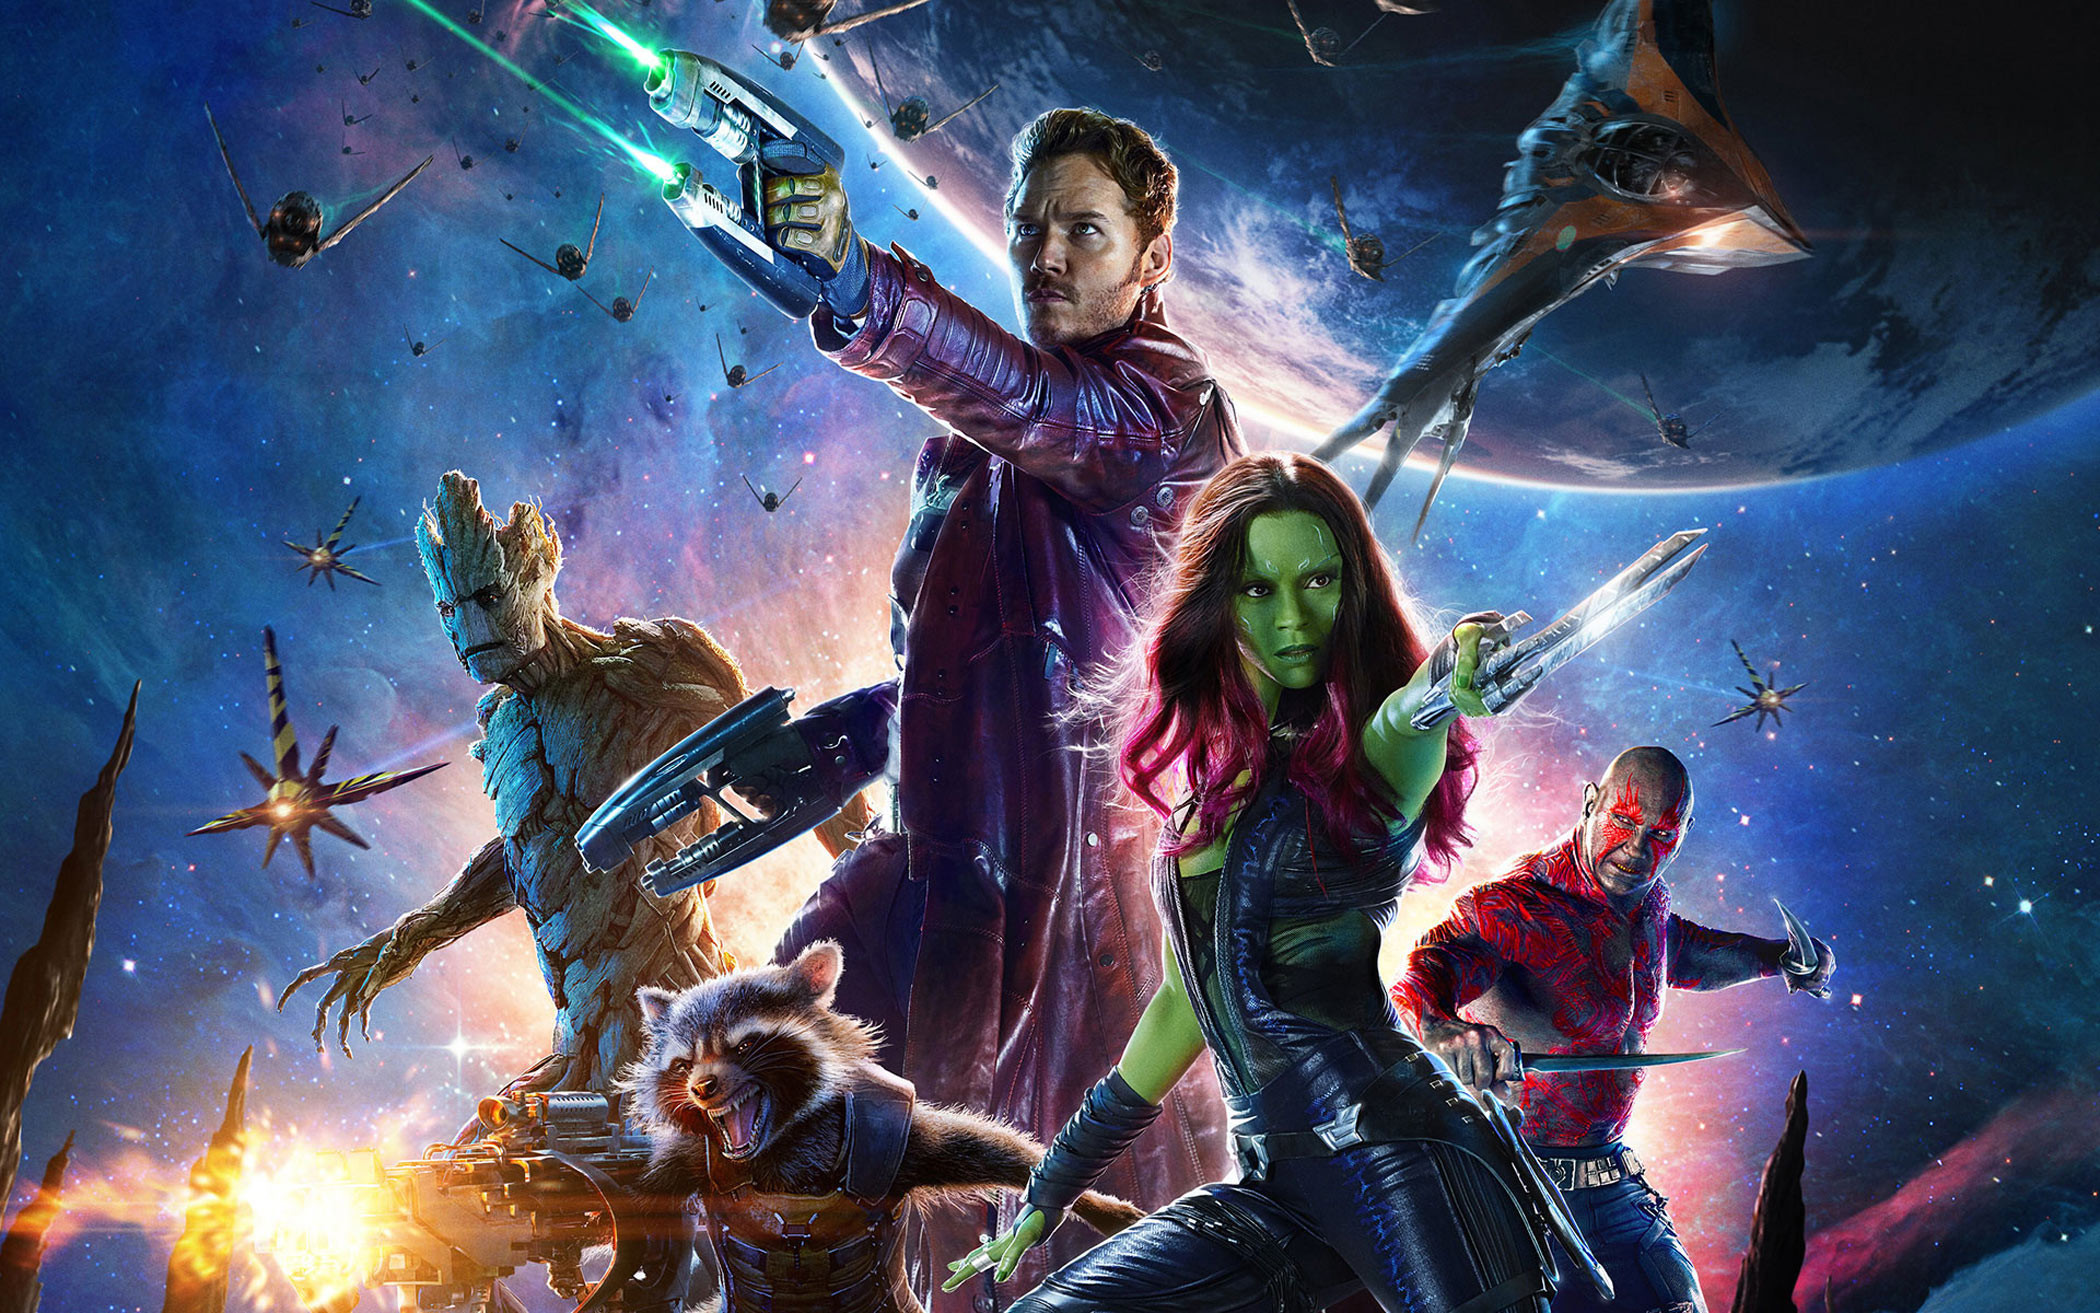 Guardians of the Galaxy awesome mix vol.1 -09. The Runaways - Cherry Bomb mp4